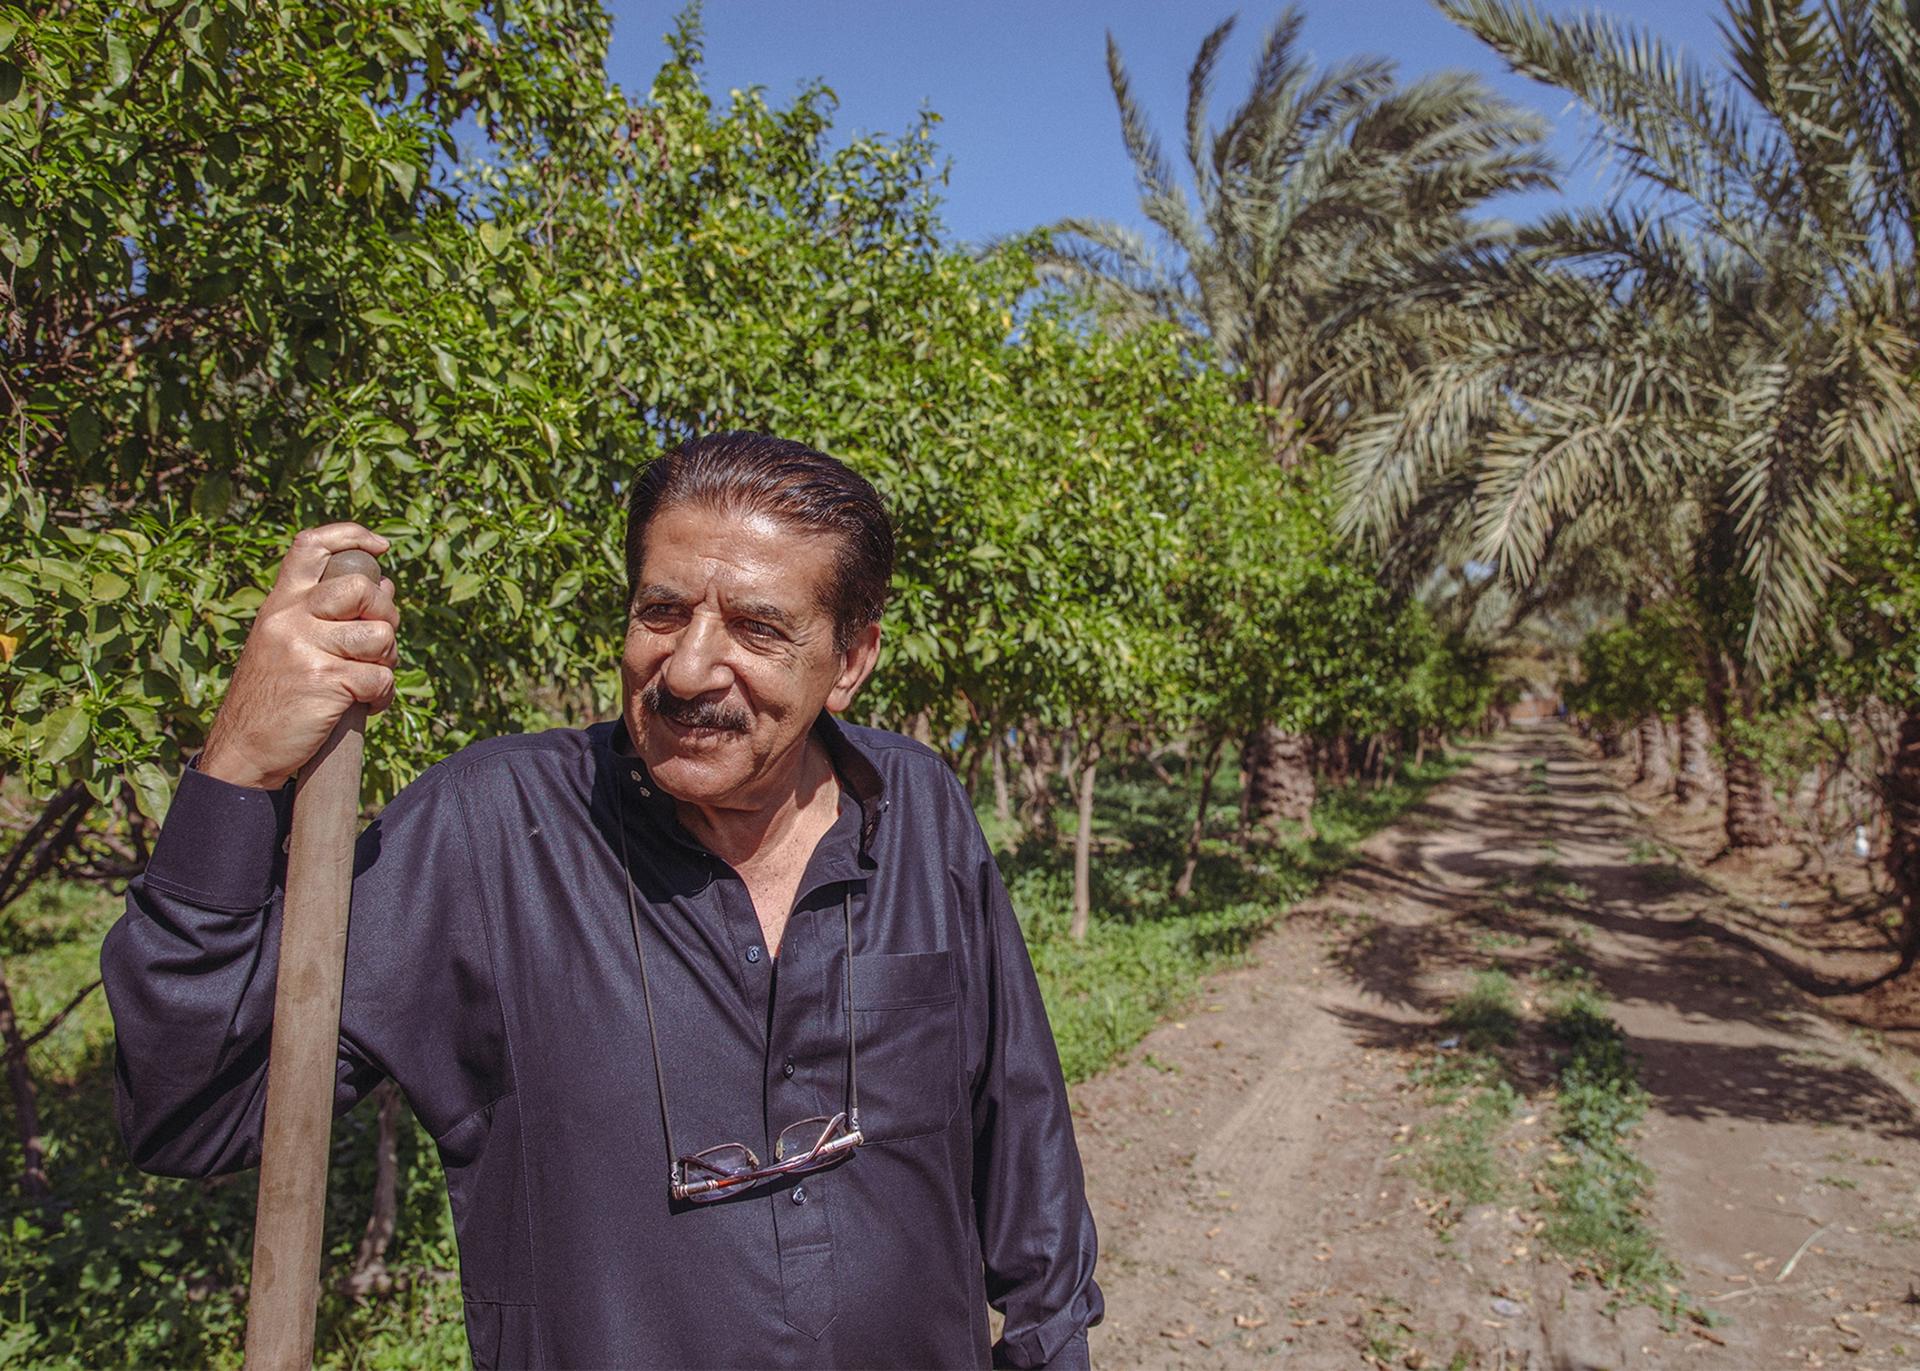 Ayyad Mohmmed Ali says his palm tree grove is his sanctuary, where he can escape the noise and pollution of Baghdad, a city of roughly 8 million people.